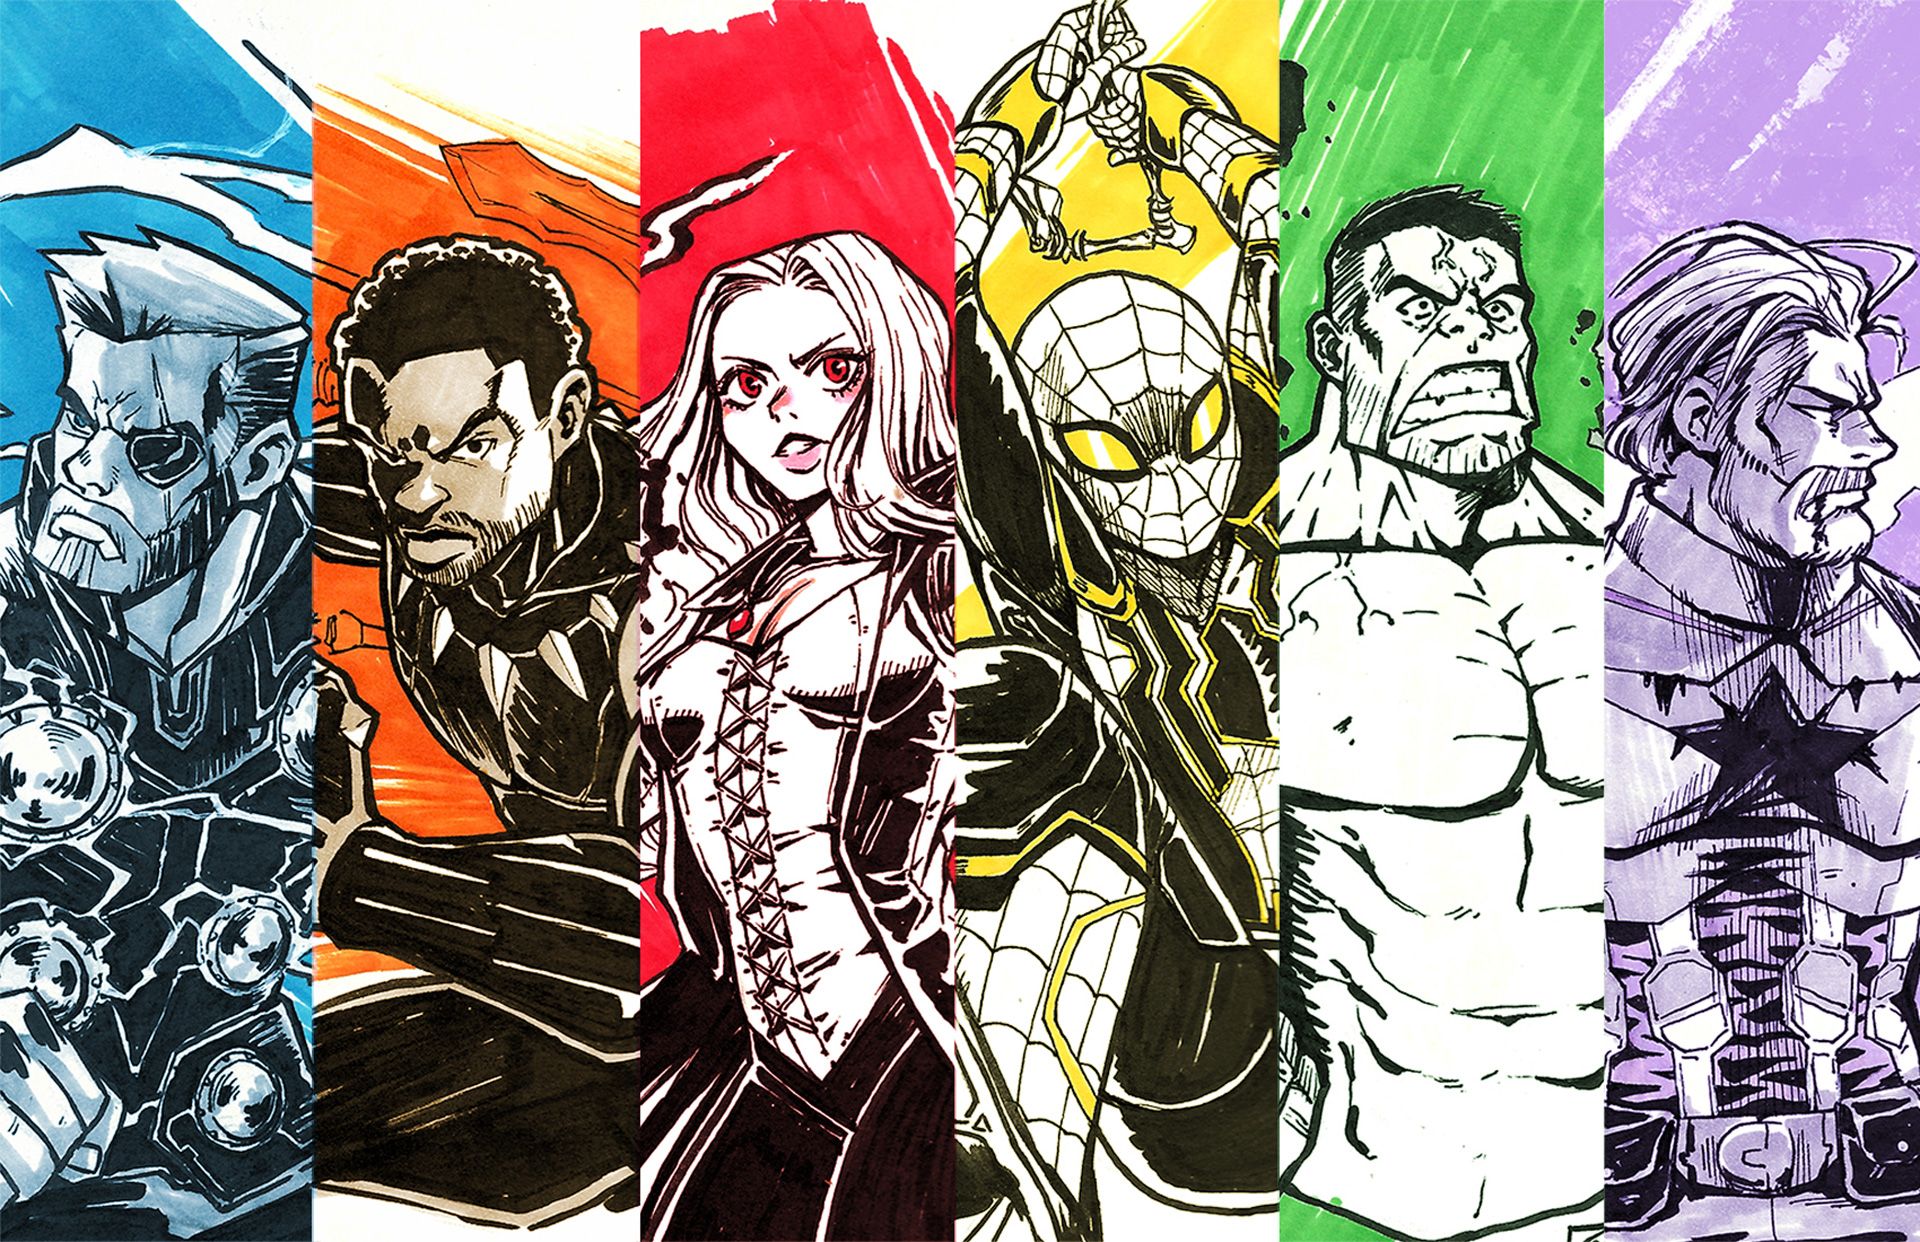 The Avengers Sketch Drawing by Avengers1118 - DragoArt